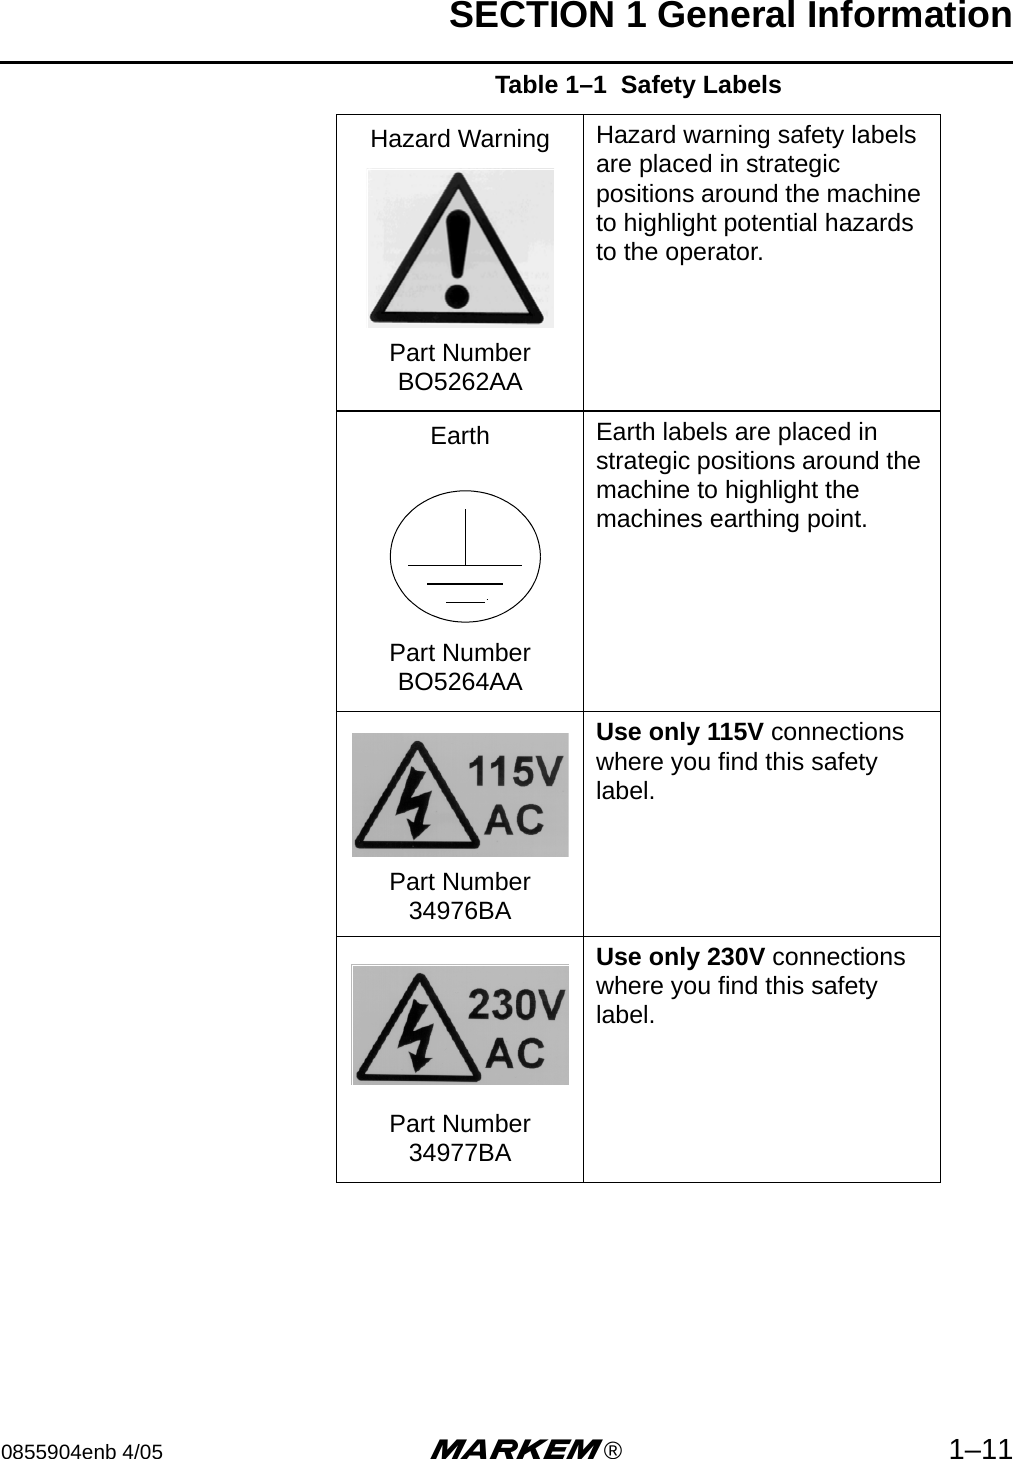 SECTION 1 General Information0855904enb 4/05 m®1–11Hazard WarningPart Number BO5262AAHazard warning safety labels are placed in strategic positions around the machine to highlight potential hazards to the operator.EarthPart Number BO5264AAEarth labels are placed in strategic positions around the machine to highlight the machines earthing point.Part Number34976BAUse only 115V connections where you find this safety label.Part Number34977BAUse only 230V connections where you find this safety label.Table 1–1  Safety Labels